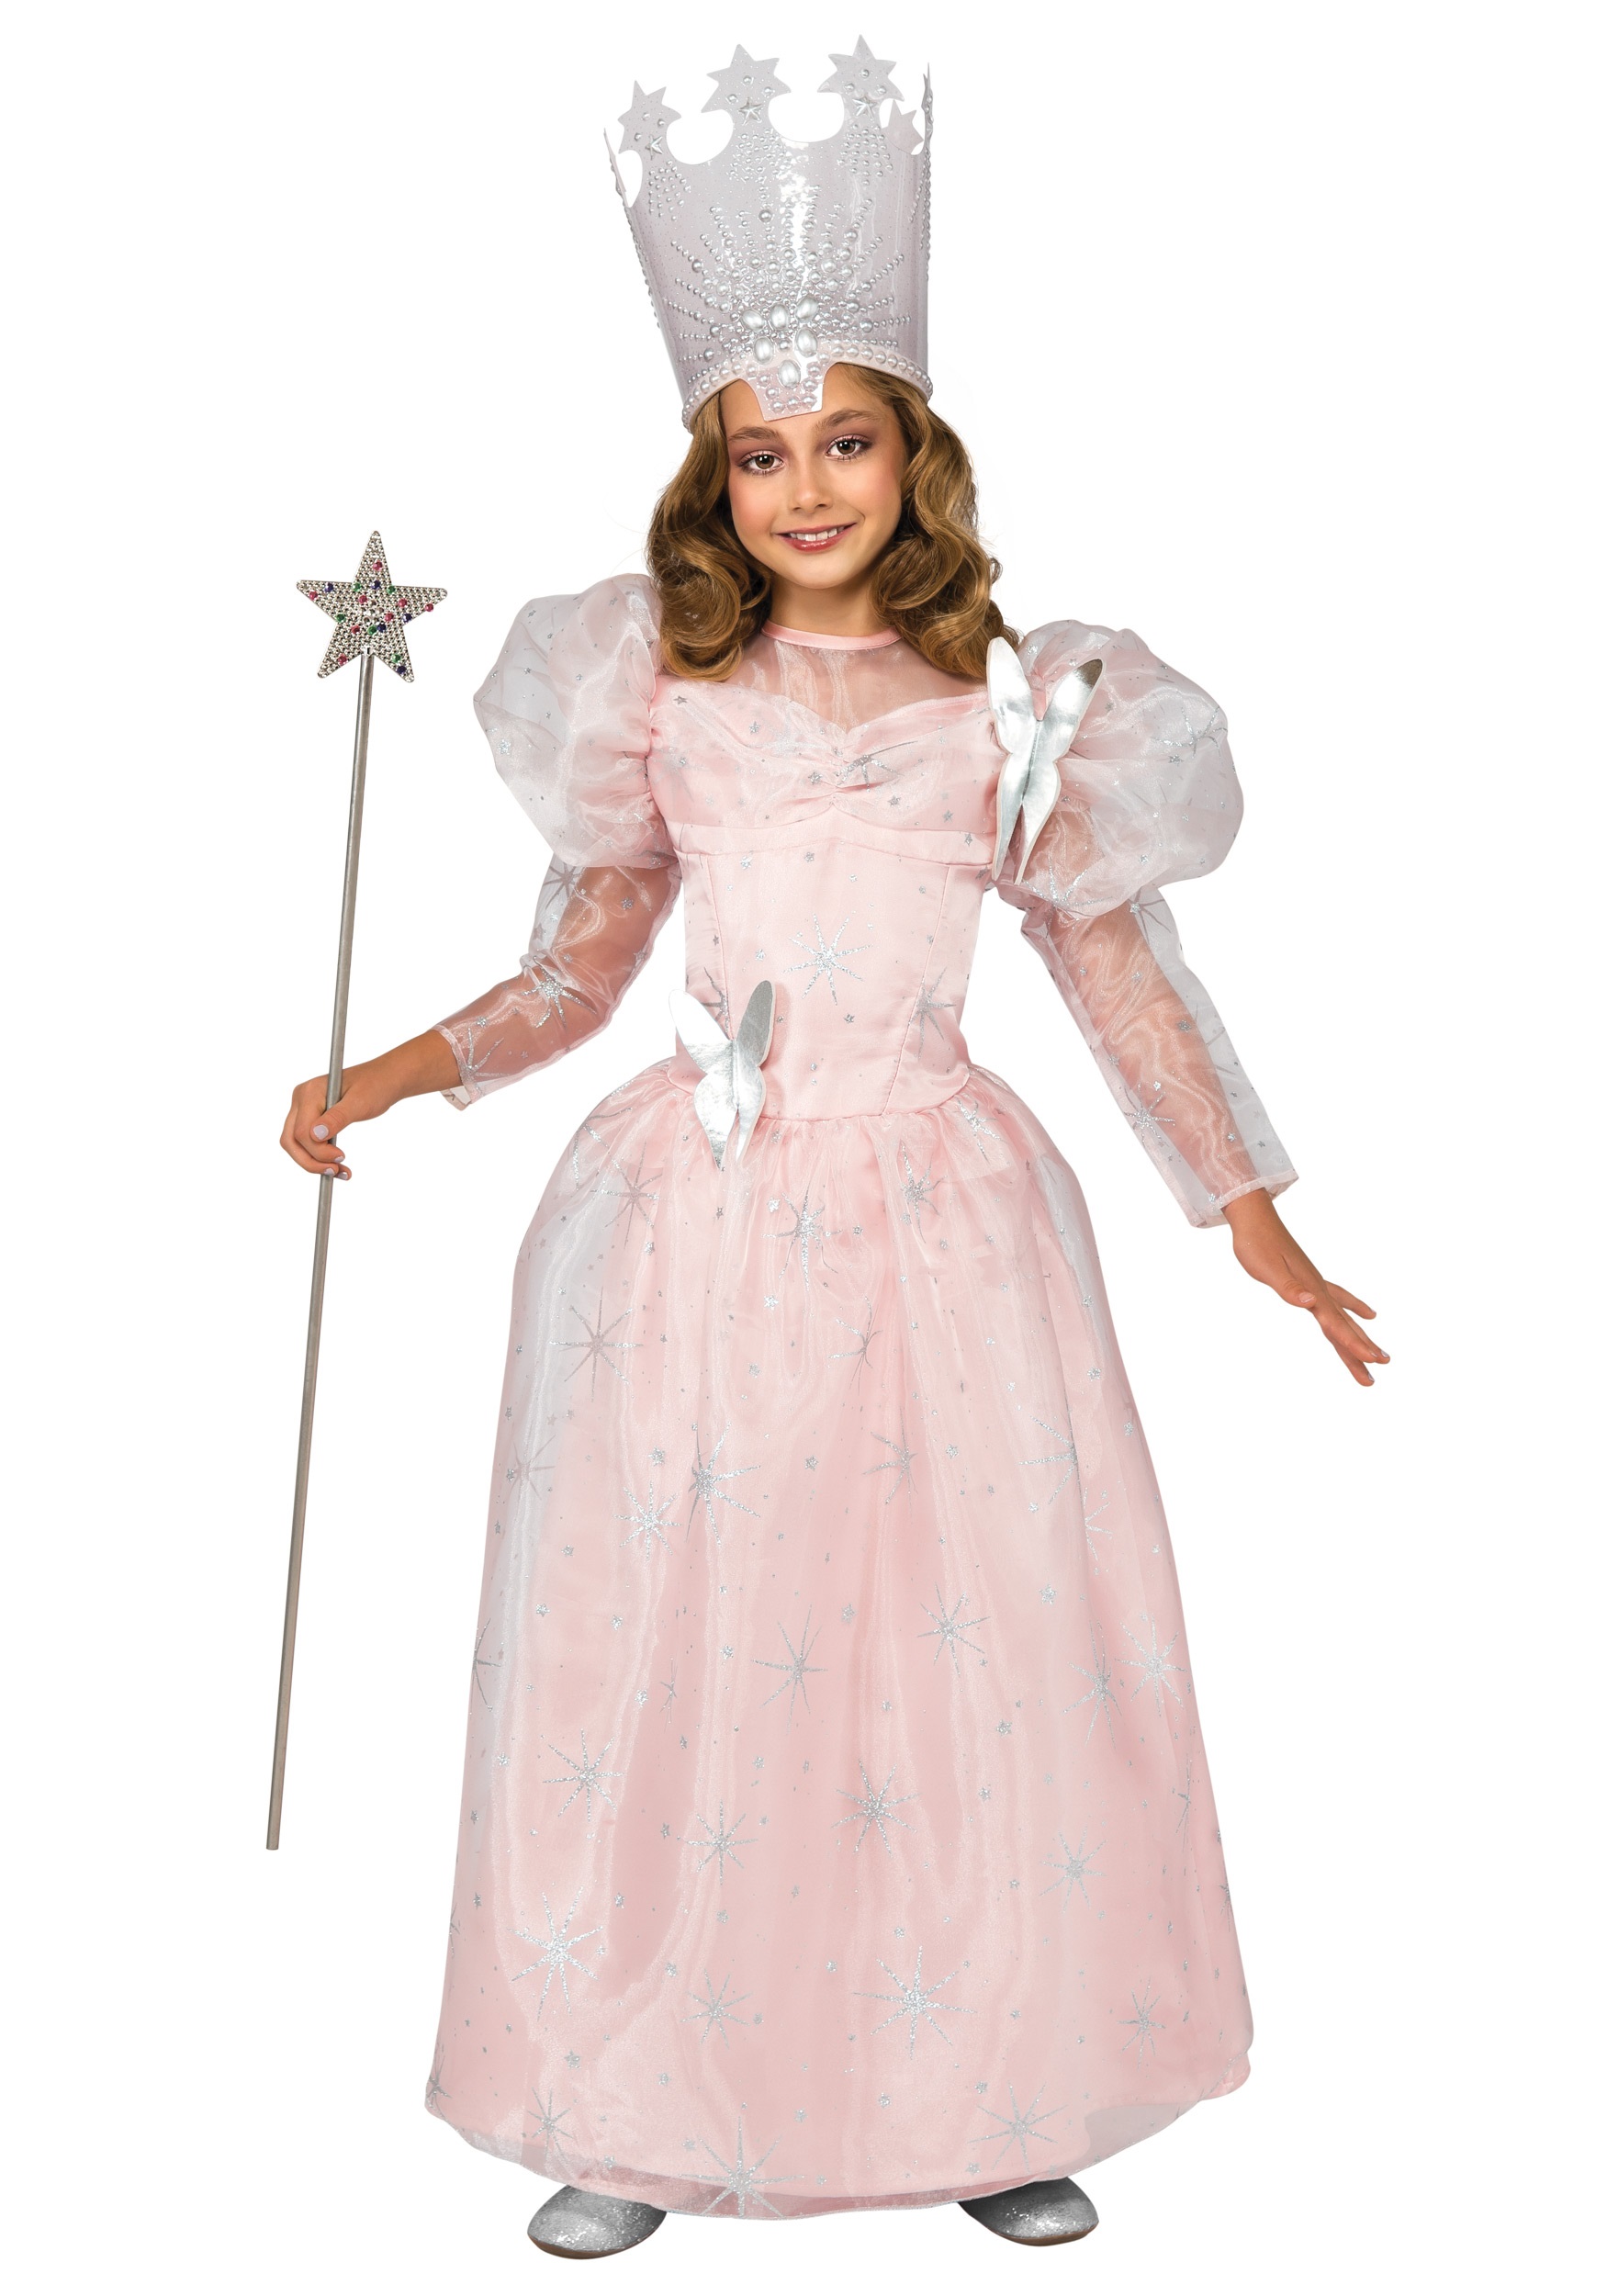 Image of Deluxe Glinda the Good Witch Costume for Kids | Wizard of Oz Costumes ID RU886495-S